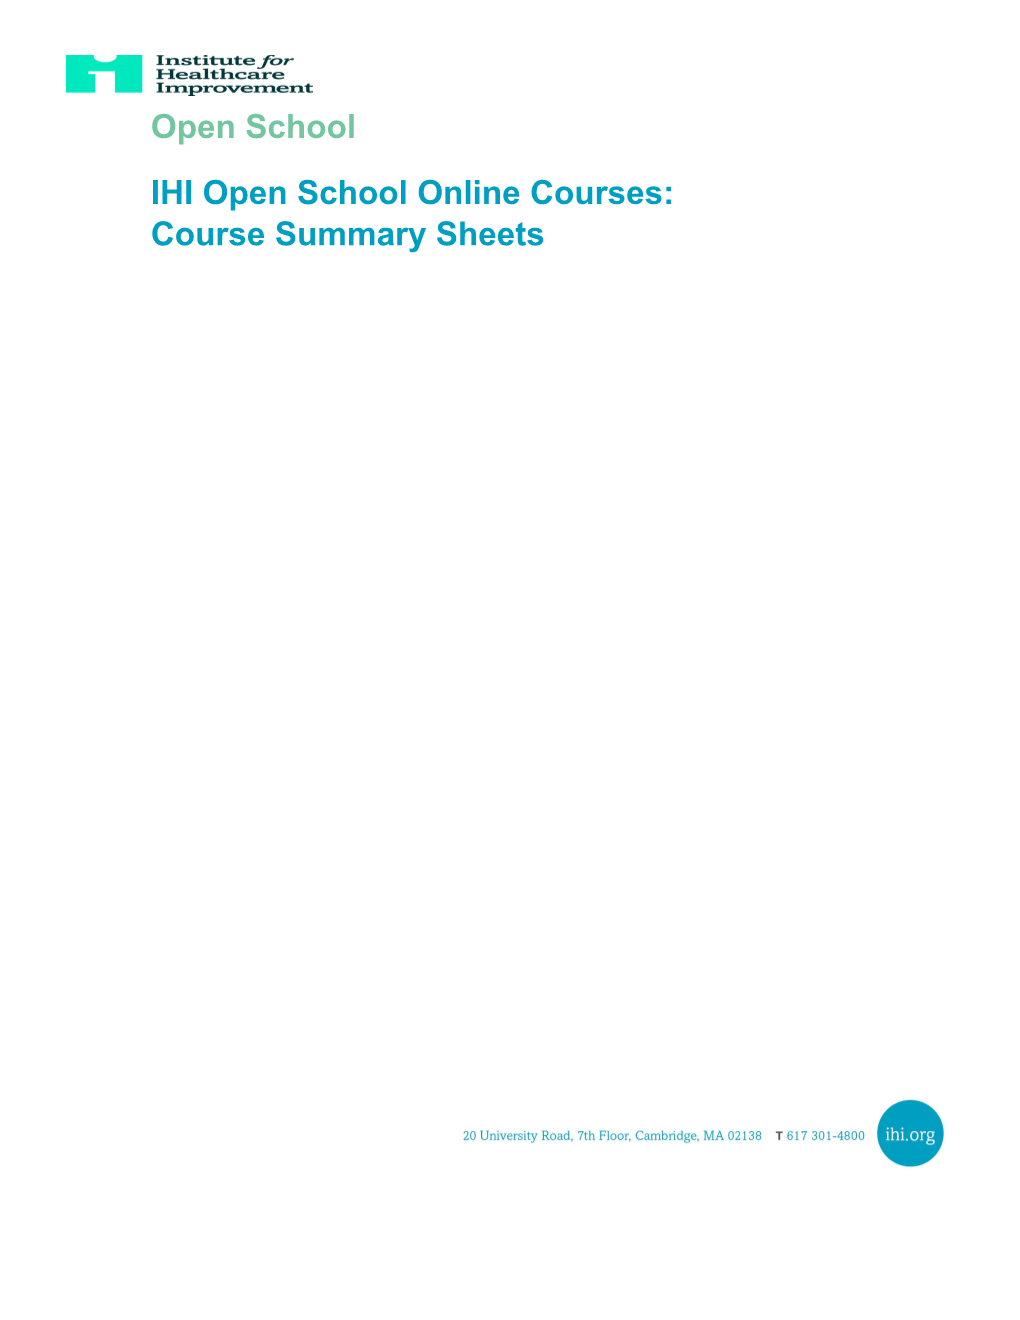 Course Summaries: Open School_Facilitator Template_Putting Patients At The Center Of Care